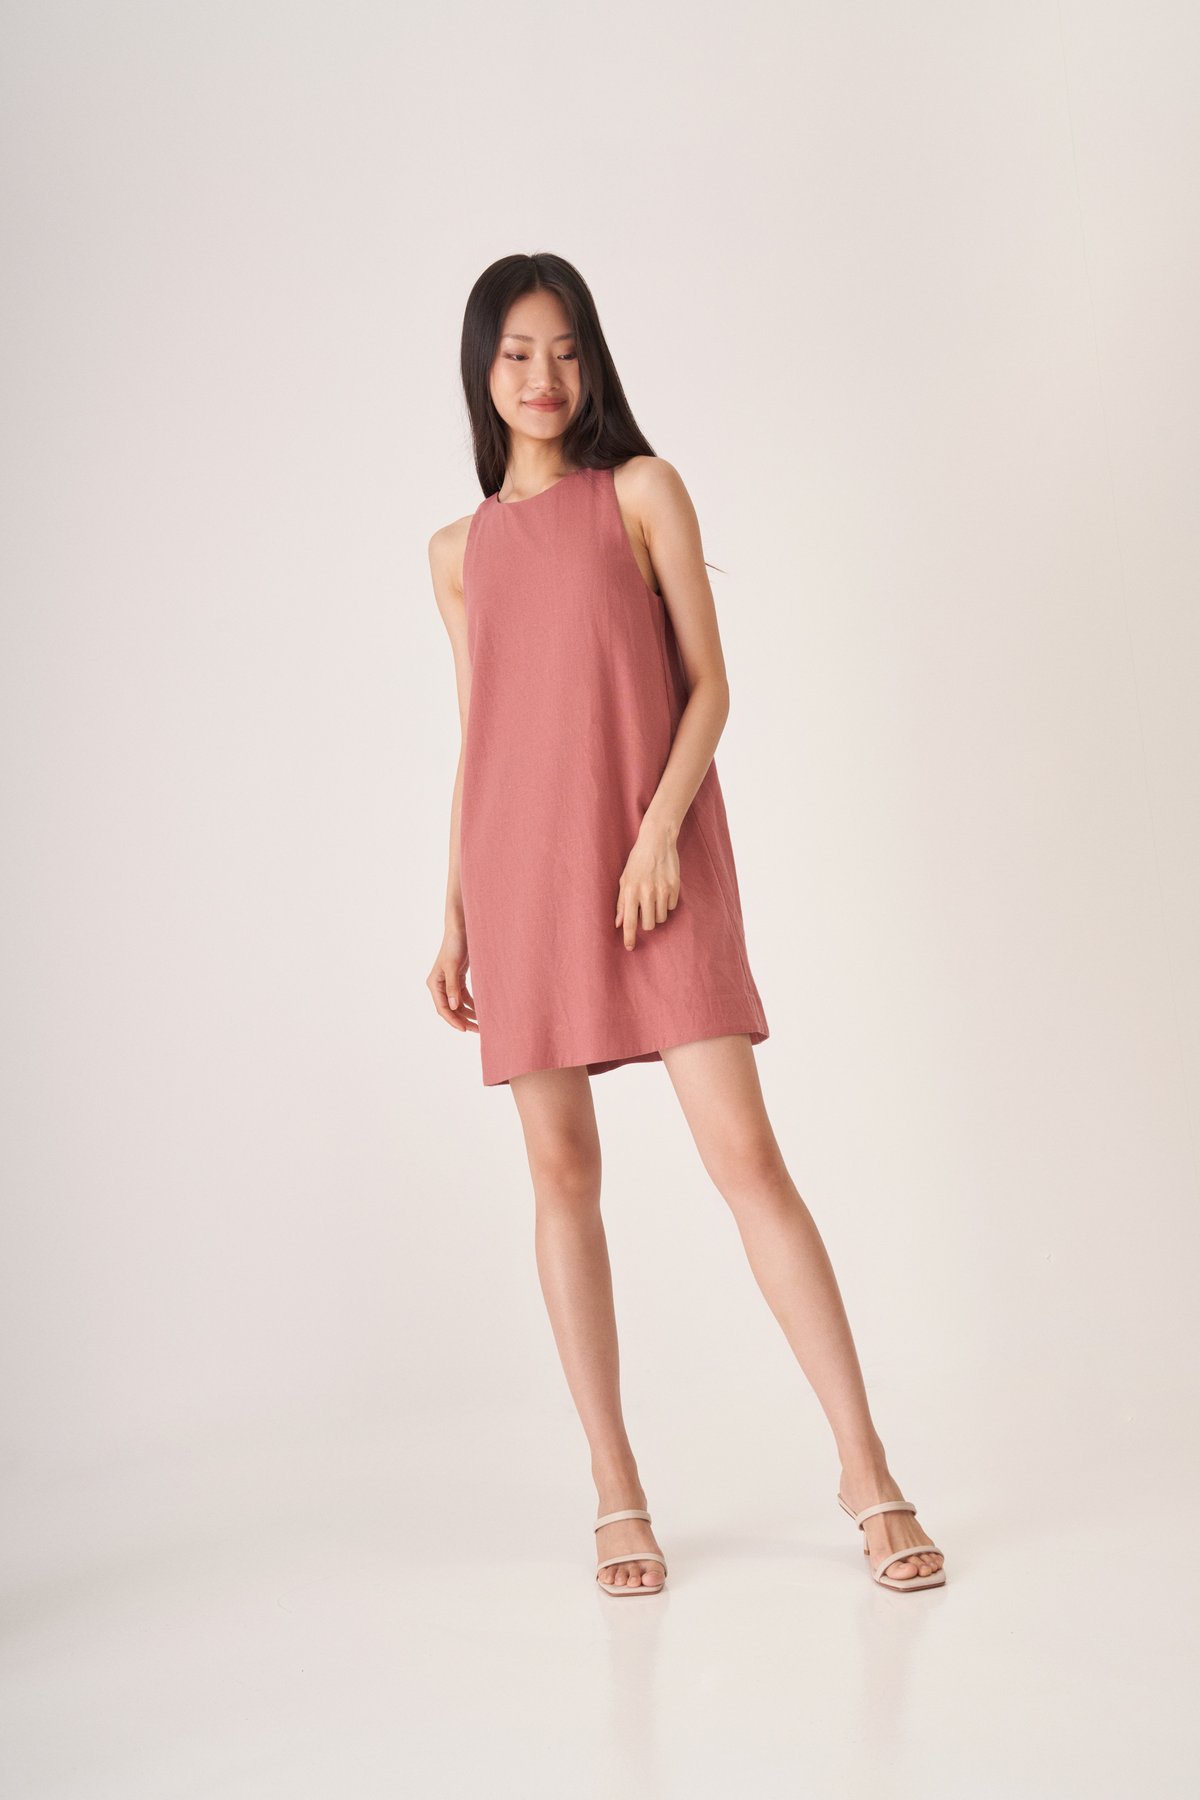 https://dum76bmz7do3s.cloudfront.net/sites/files/theclosetlover/images/products/202305/1200xAUTO/penny_shift_dress_in_raspberry1.jpg